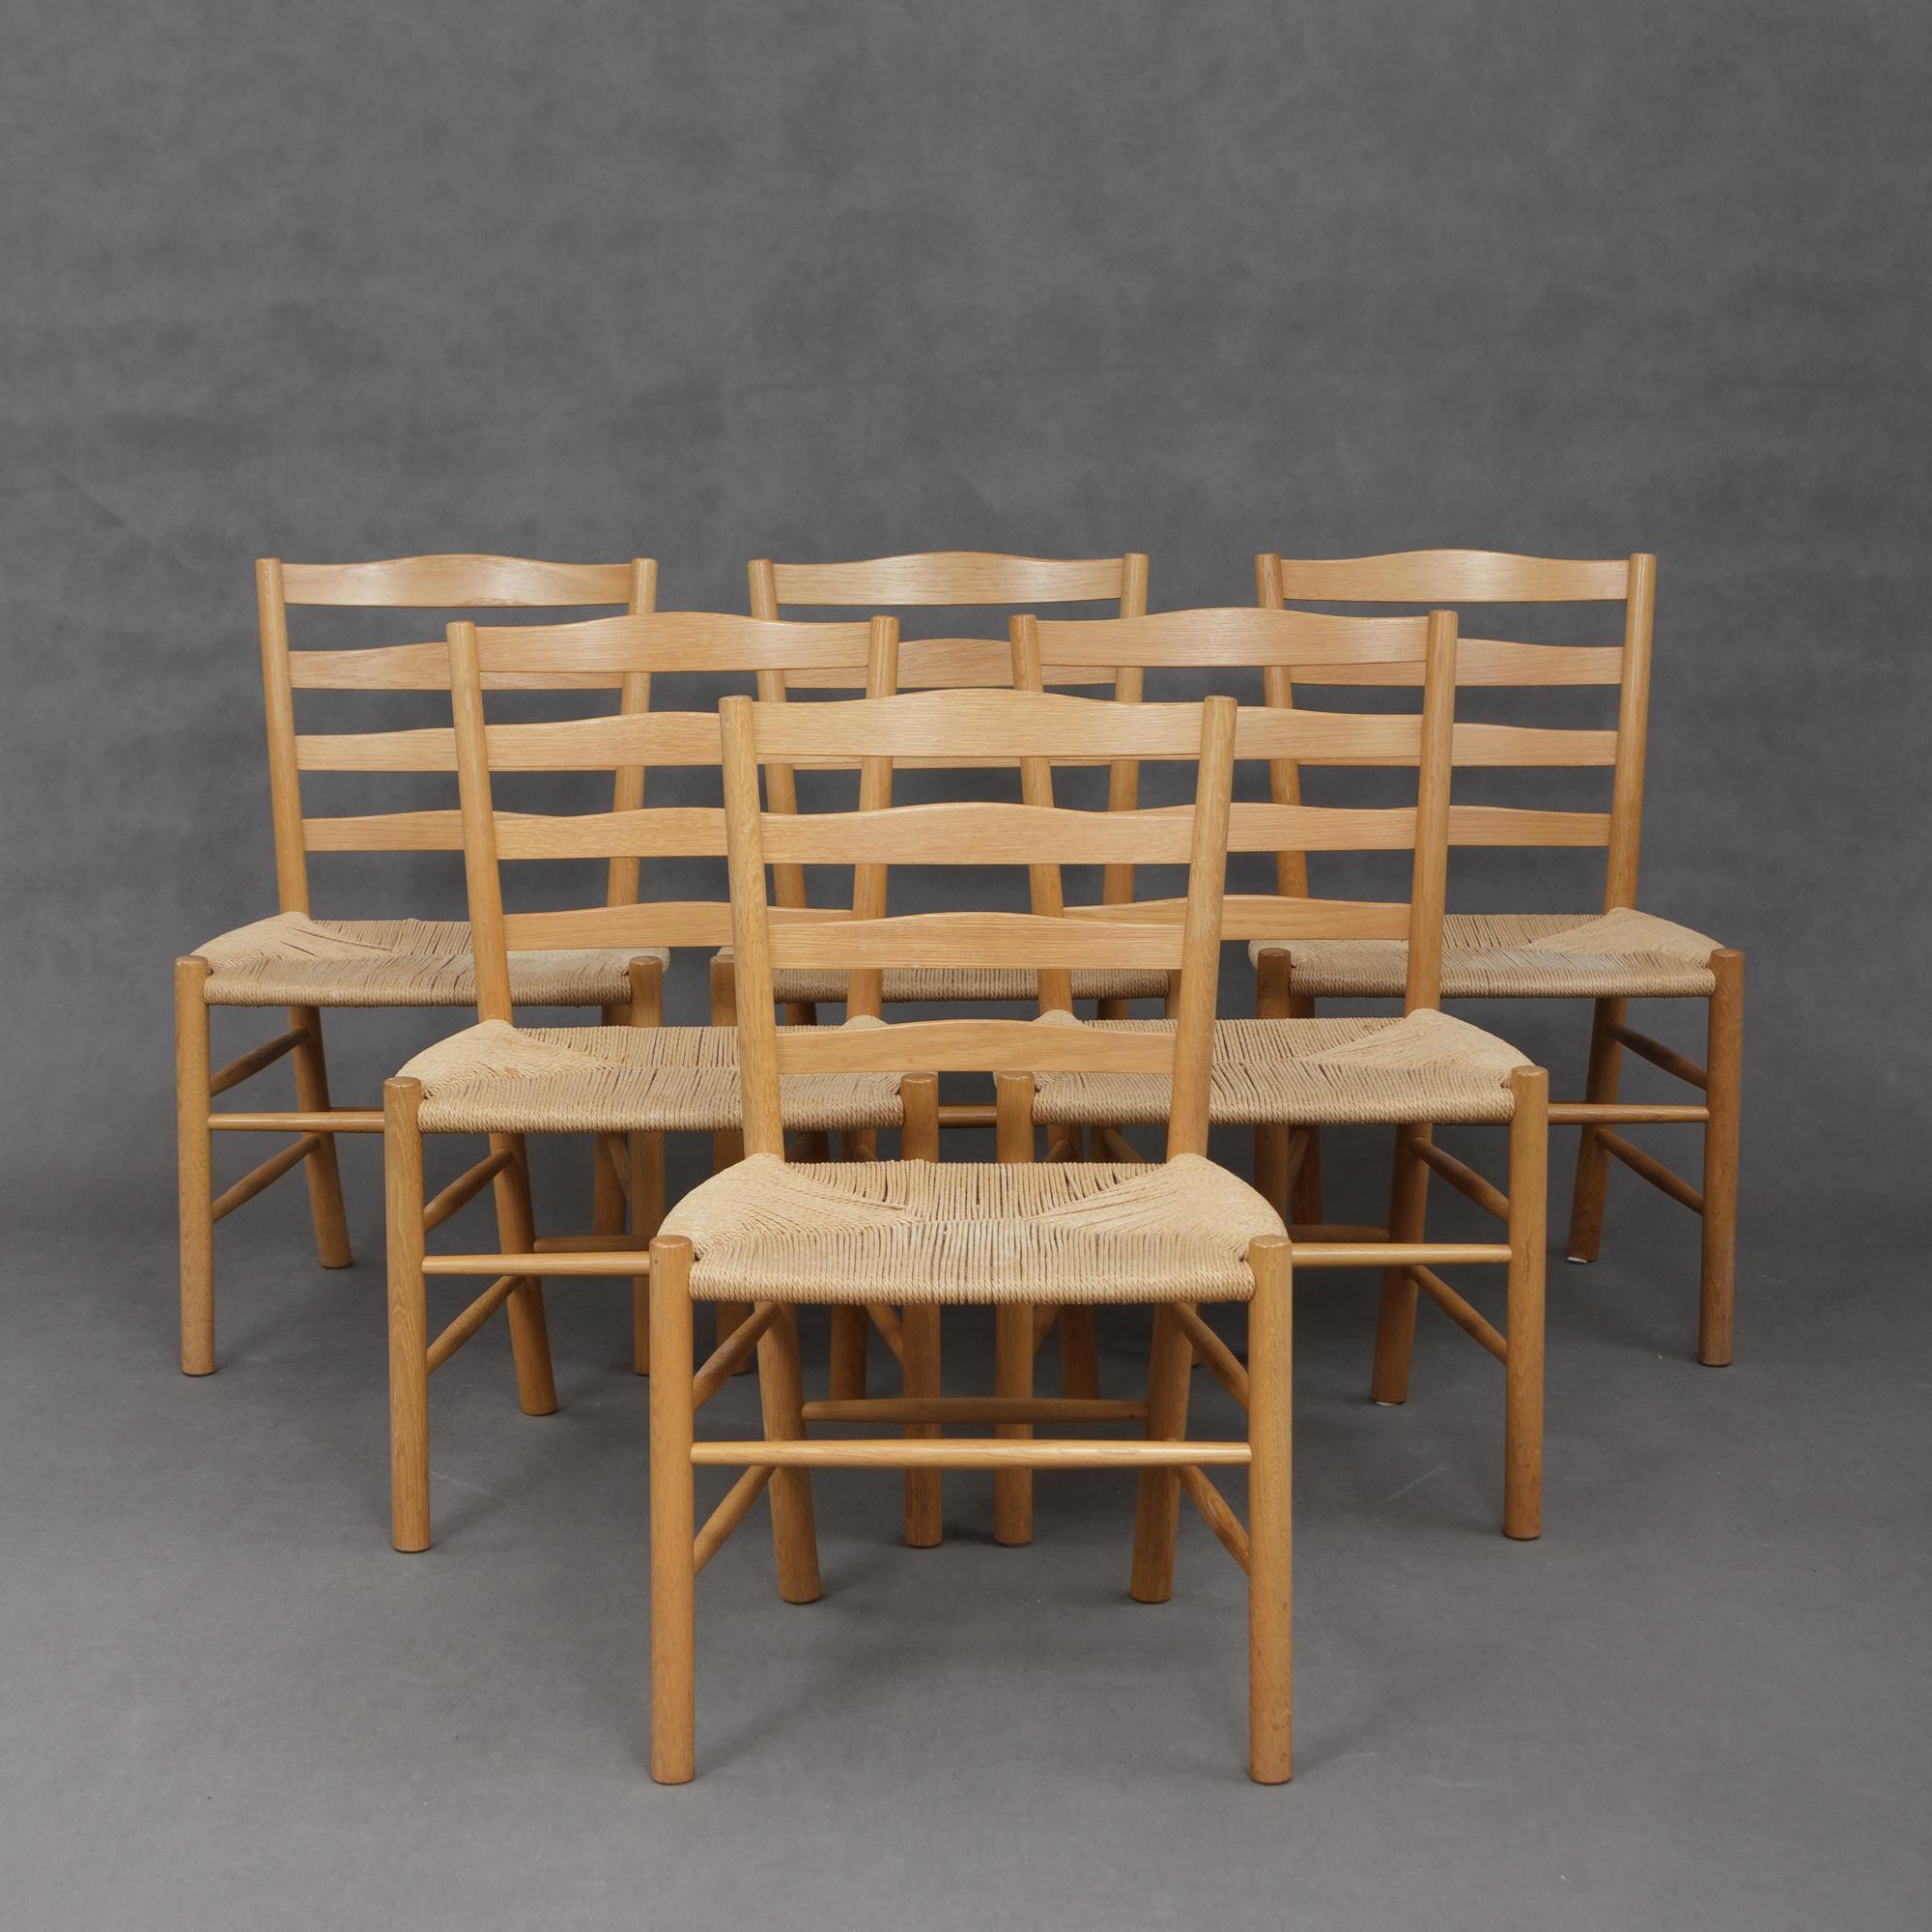 Designed in the 1950s these Classic Danish chairs feature solid light oak structure and paper cord seats. This particular set was manufactured in 1984. Good condition with no loose joints and above all not damaged or stretched seats. Fritz Hansen